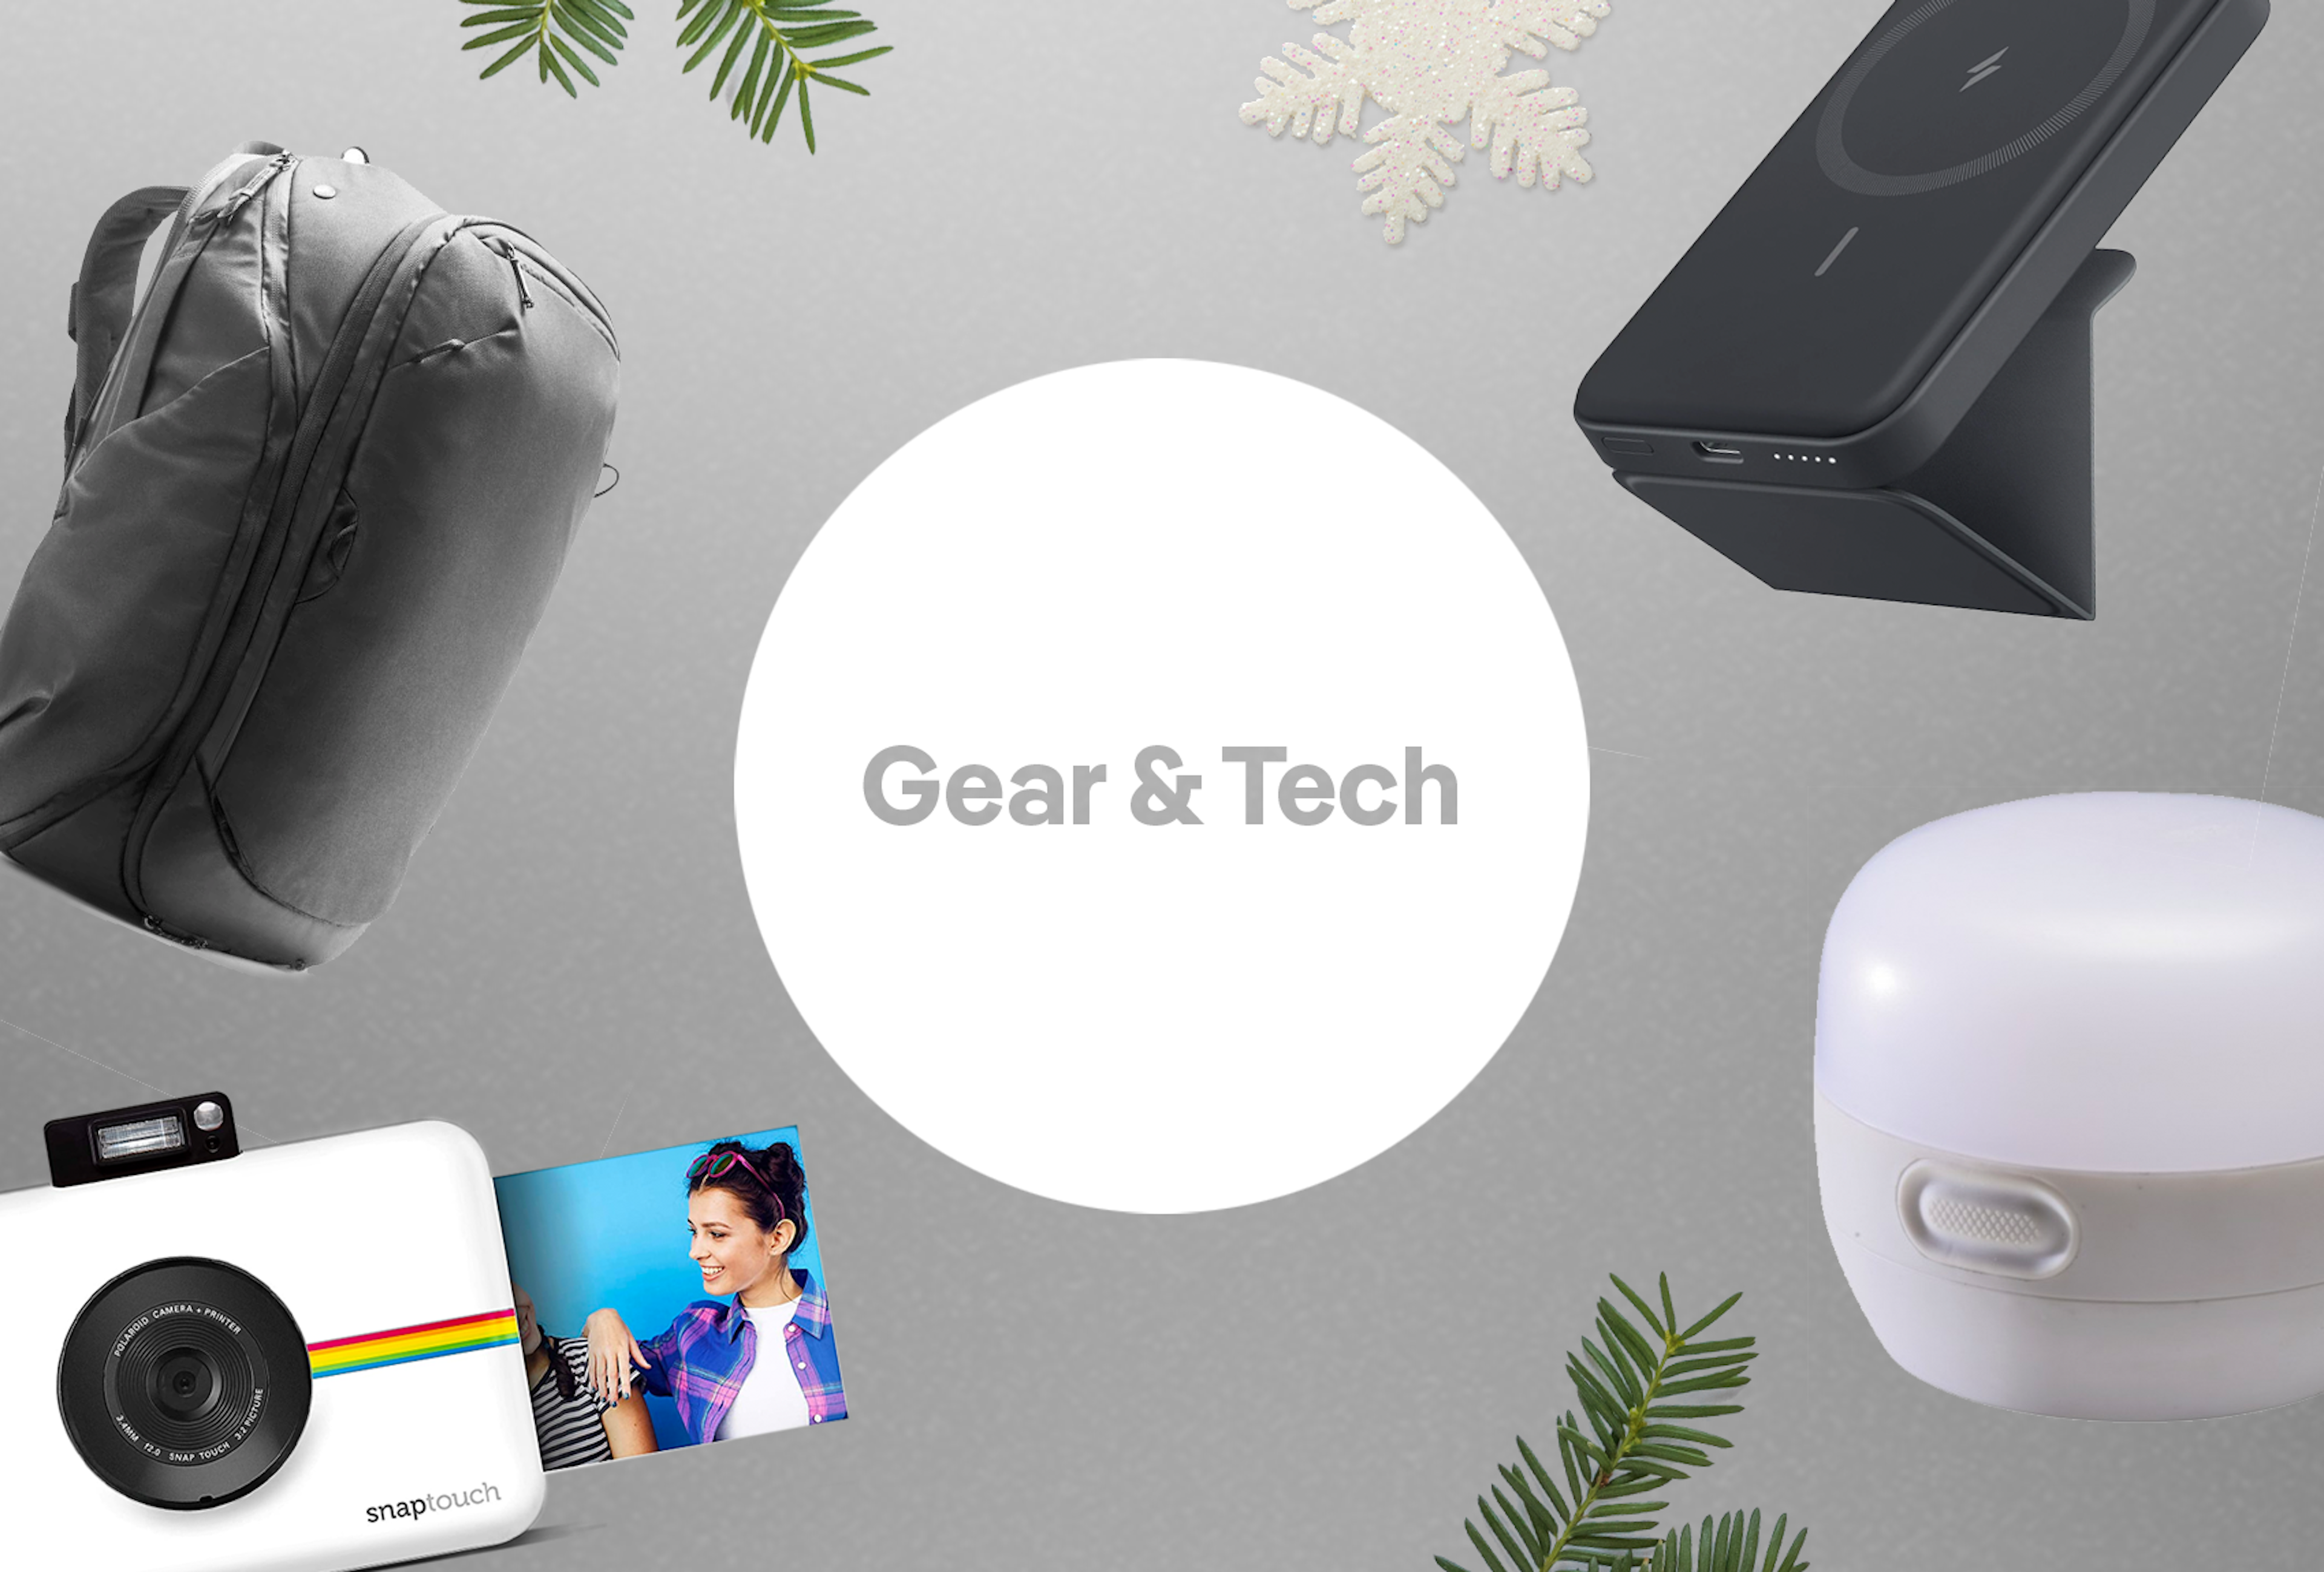 A grey background with a white circle in the center. Inside the circle are the words Gear & Tech also in grey. Surrounding the circle are images of a black backpack, a polaroid camera and a white camping lantern